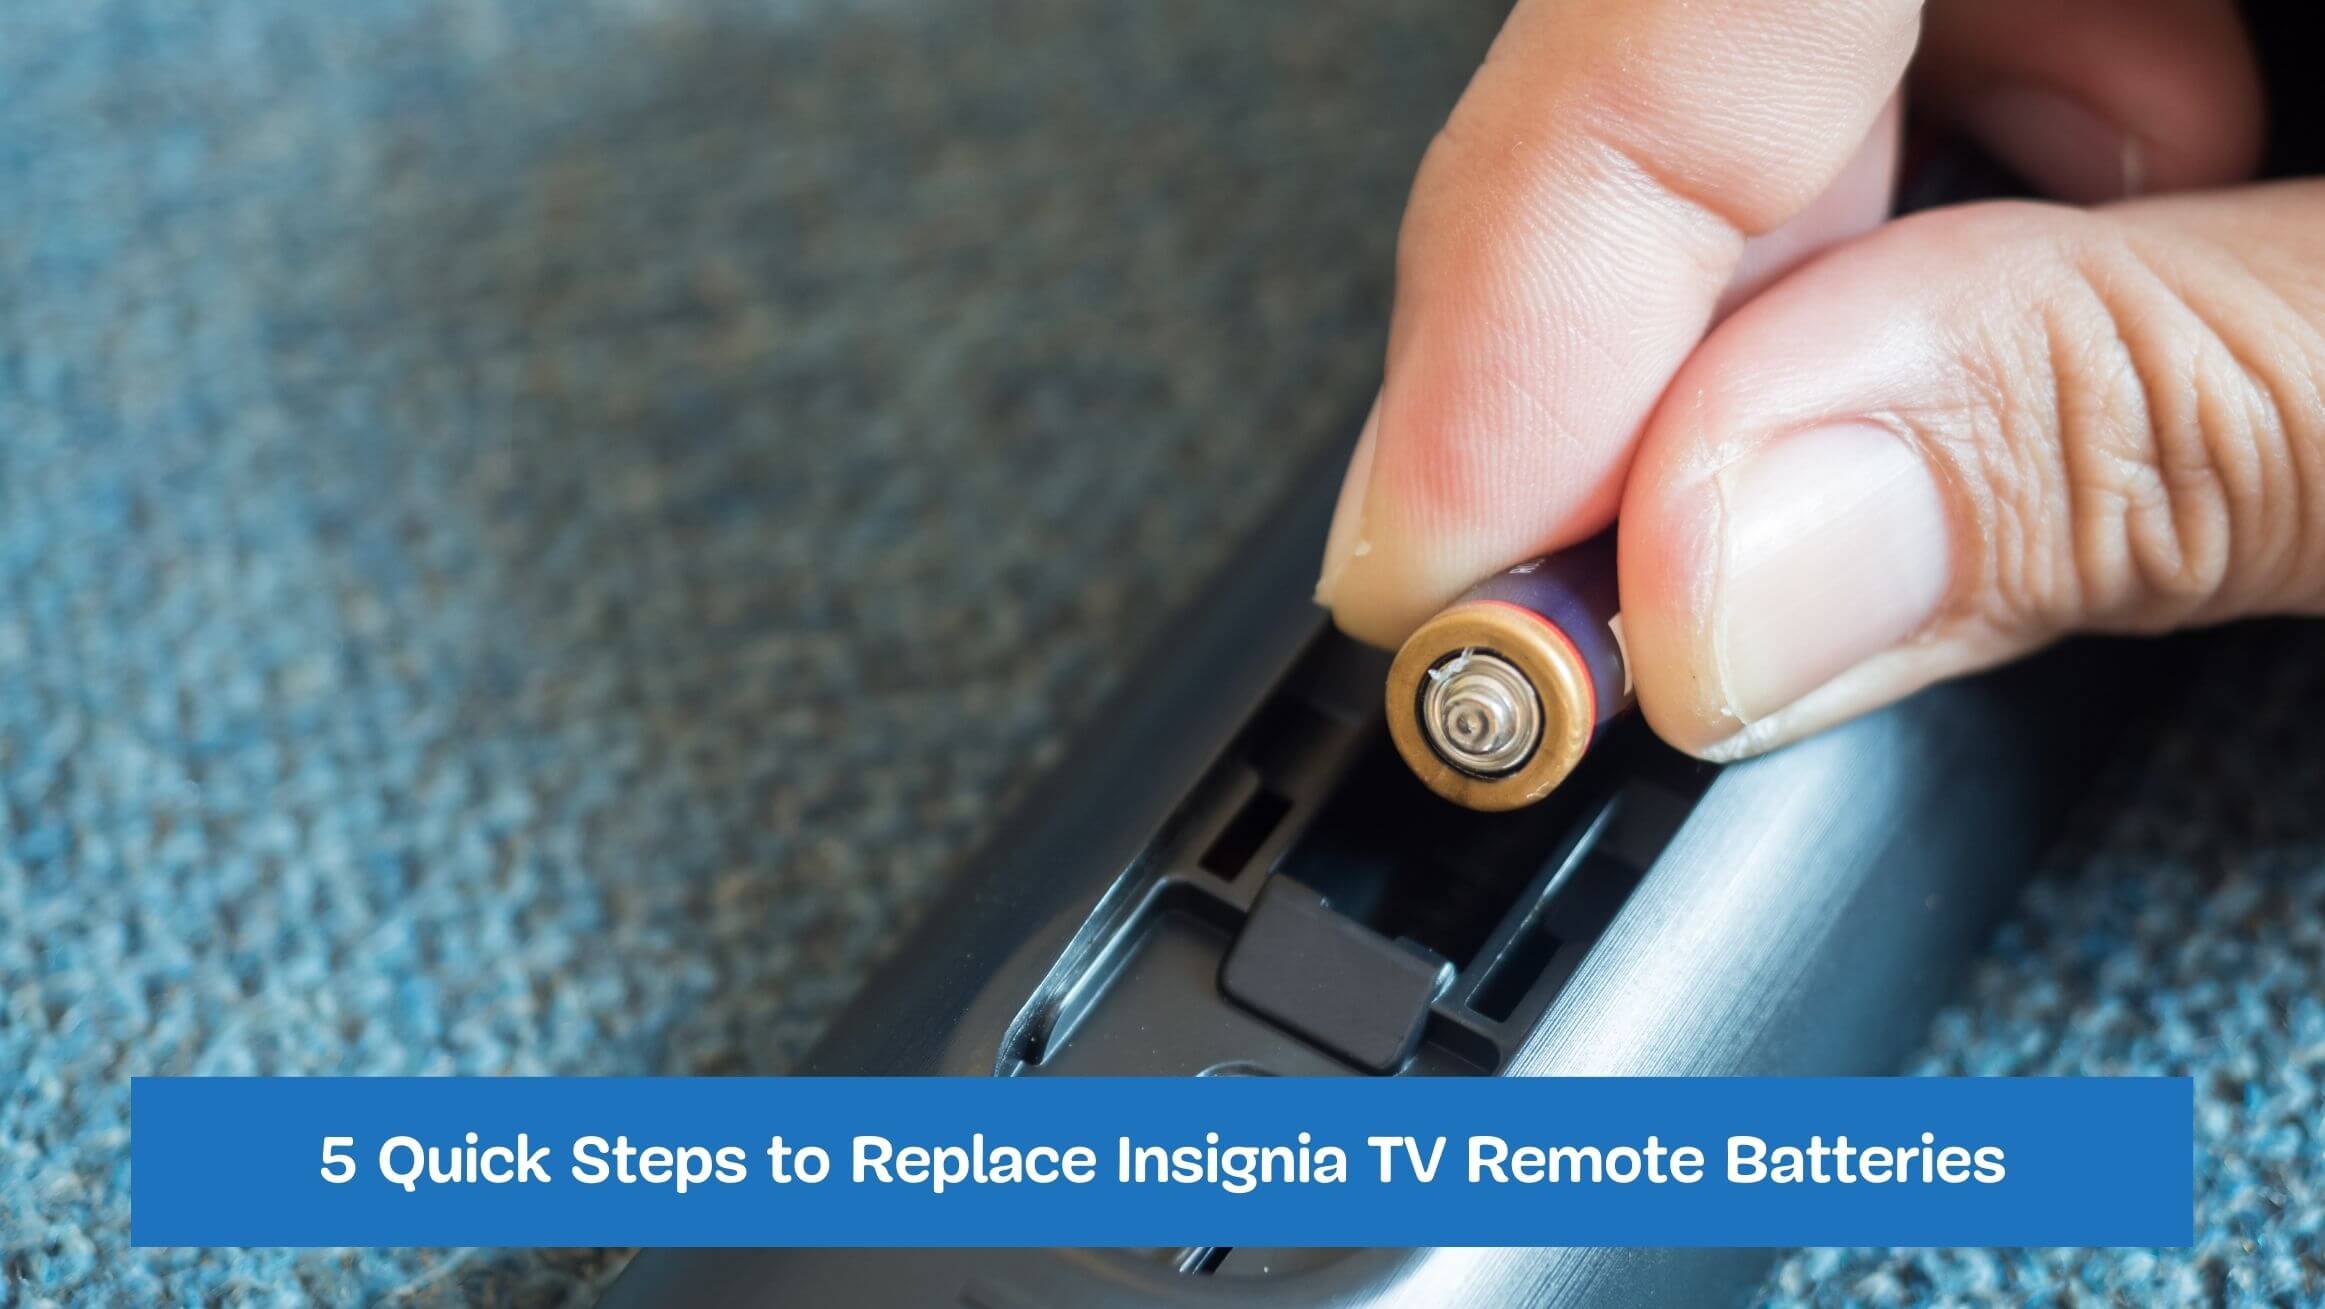 5 Quick Steps to Replace Insignia TV Remote Batteries